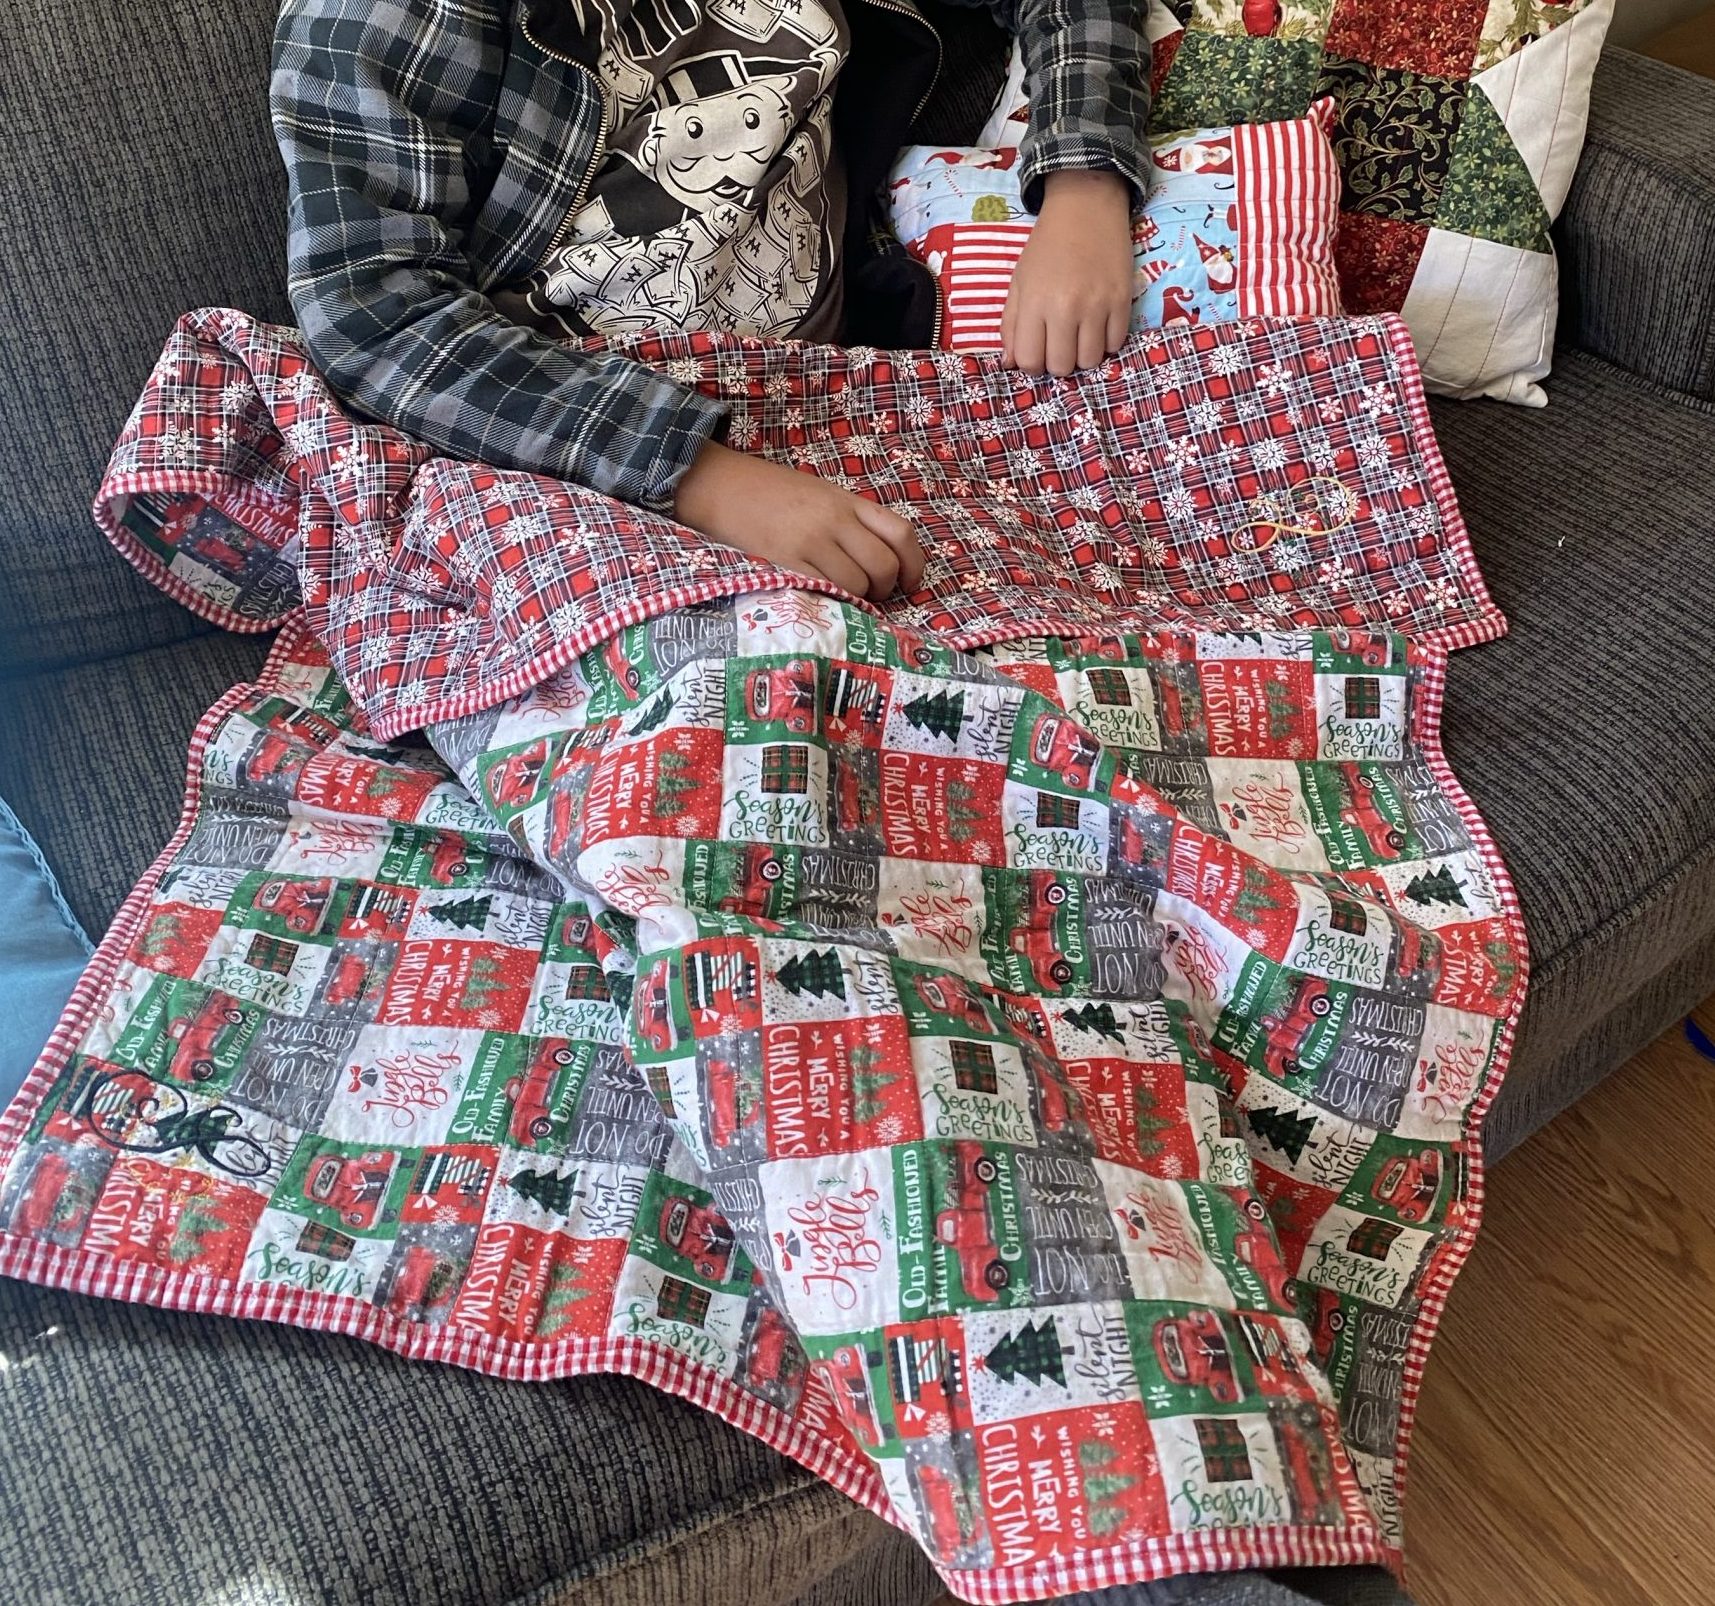 How to Make a Whole Cloth Quilt for Christmas or Baby- PDF Pattern